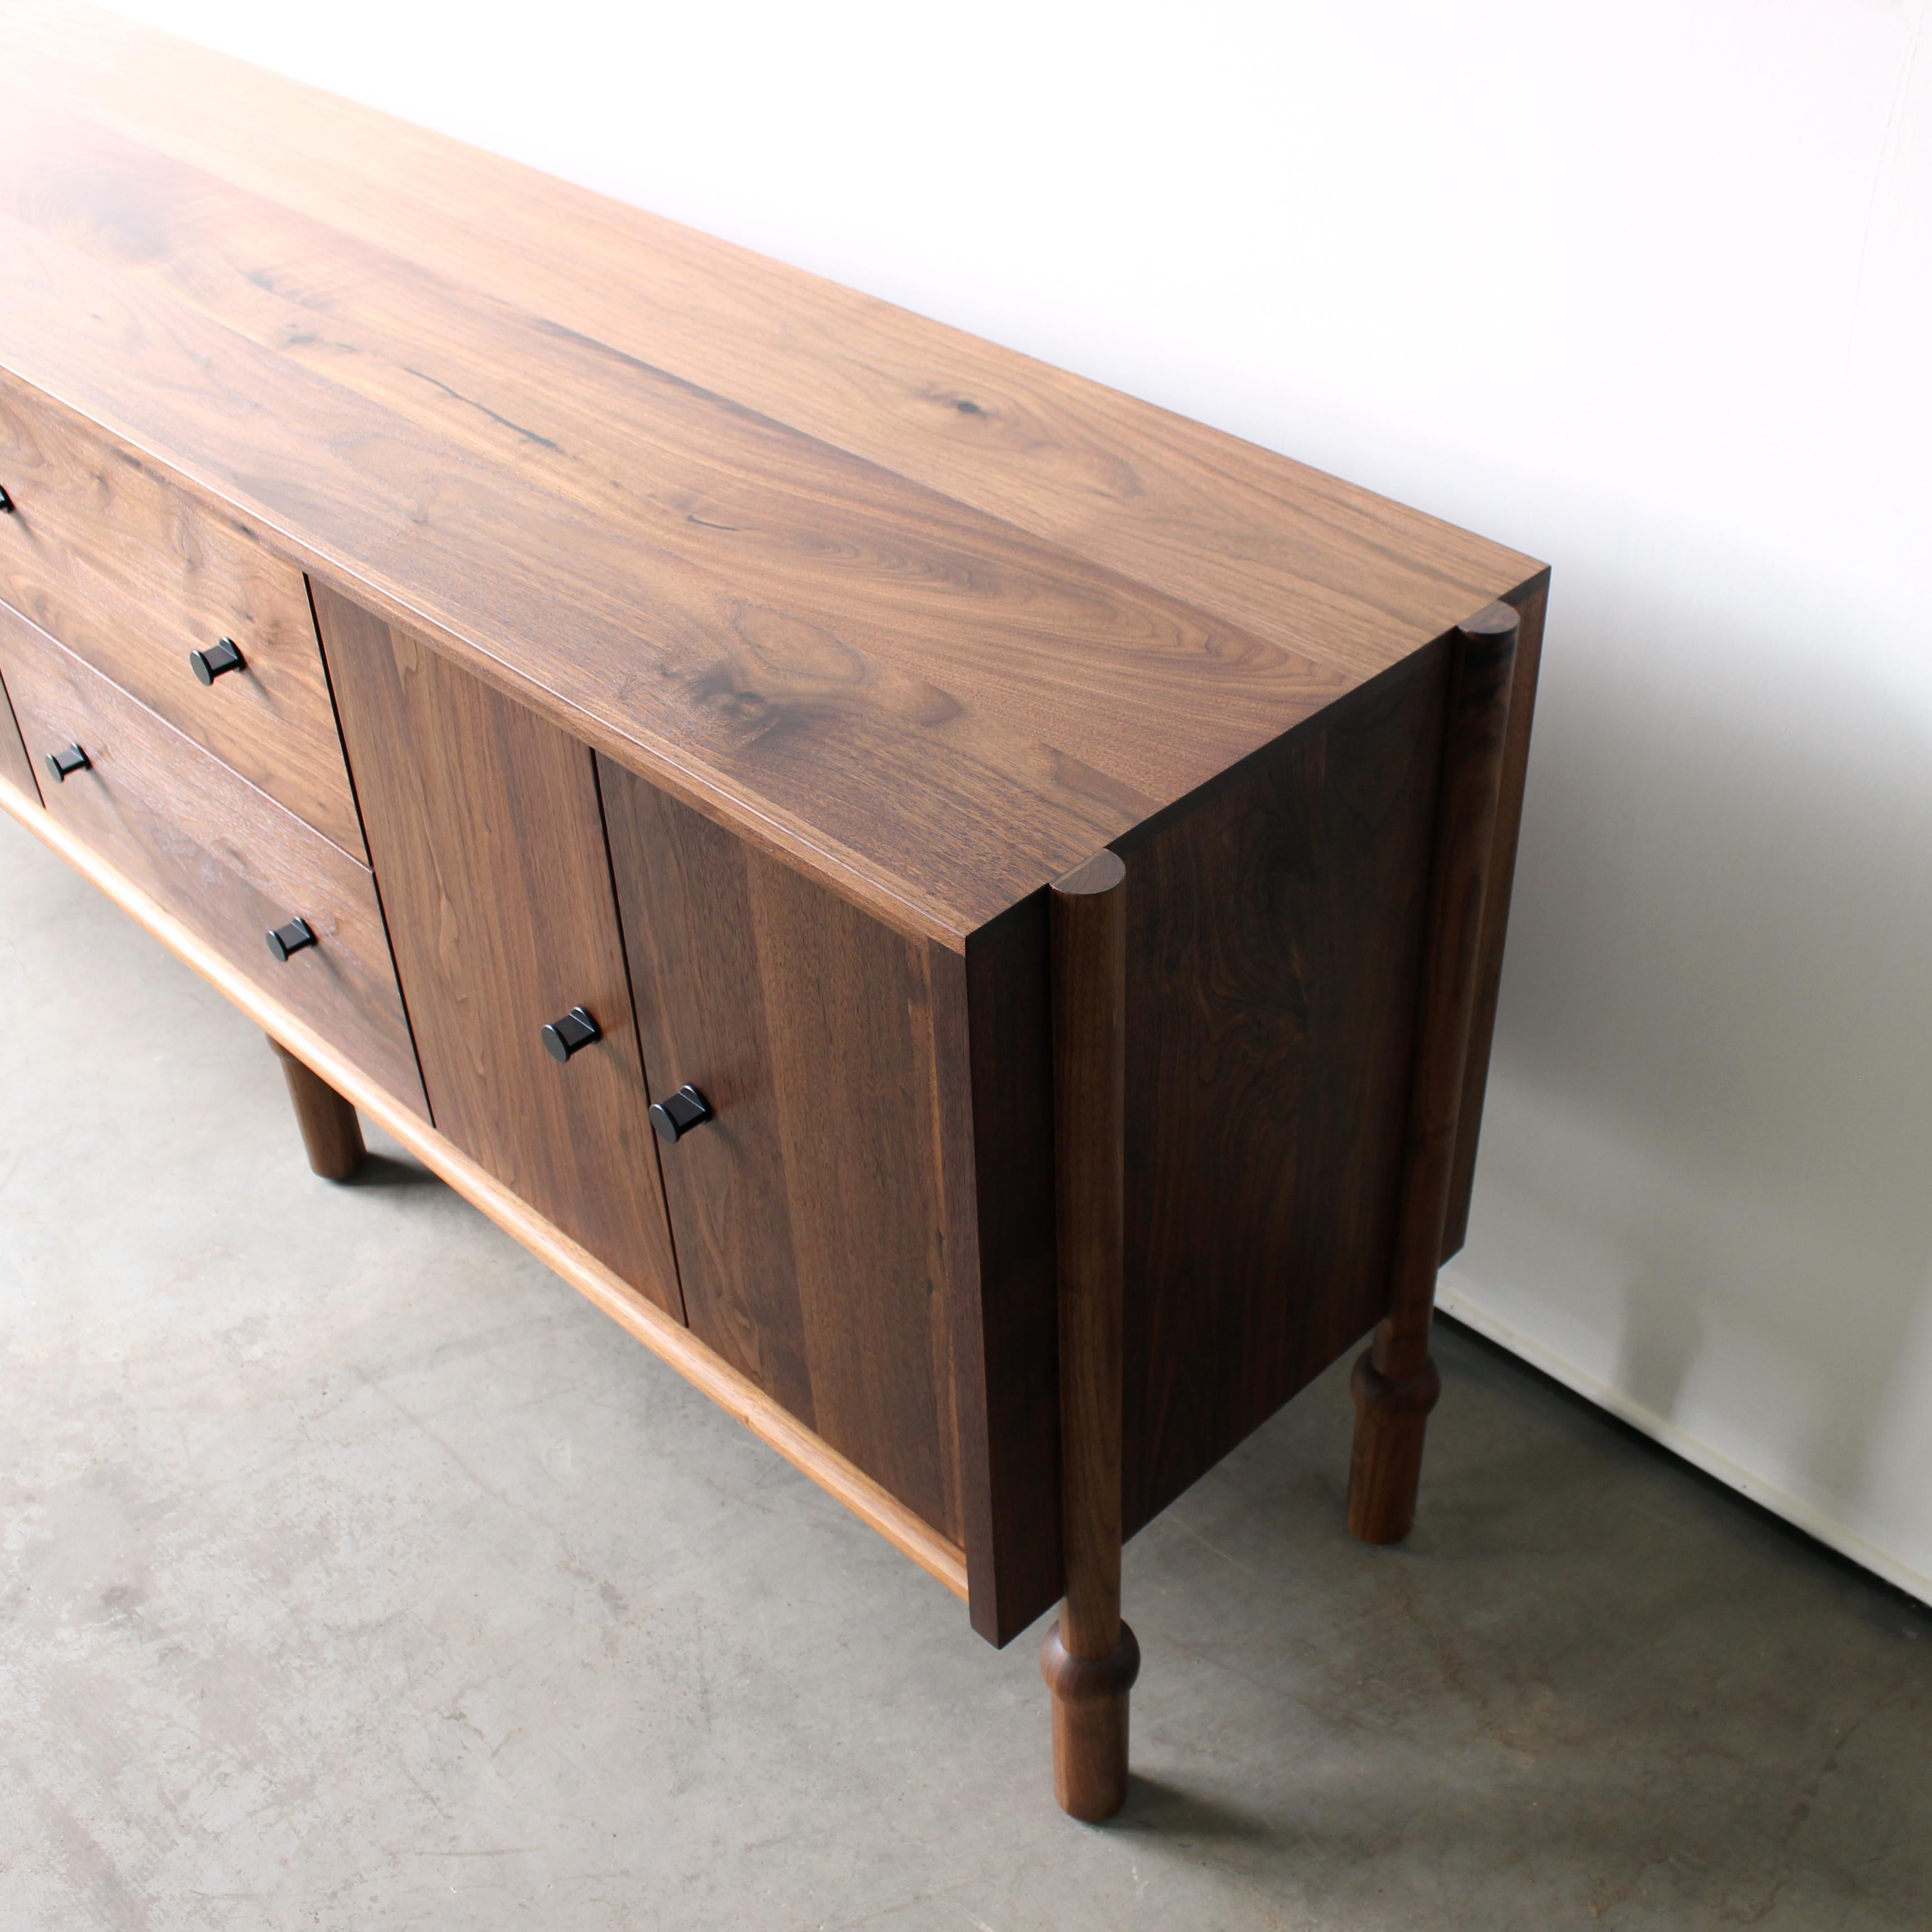 Modern Mae Solid Walnut Credenza, Console, Sideboard by Crump and Kwash For Sale